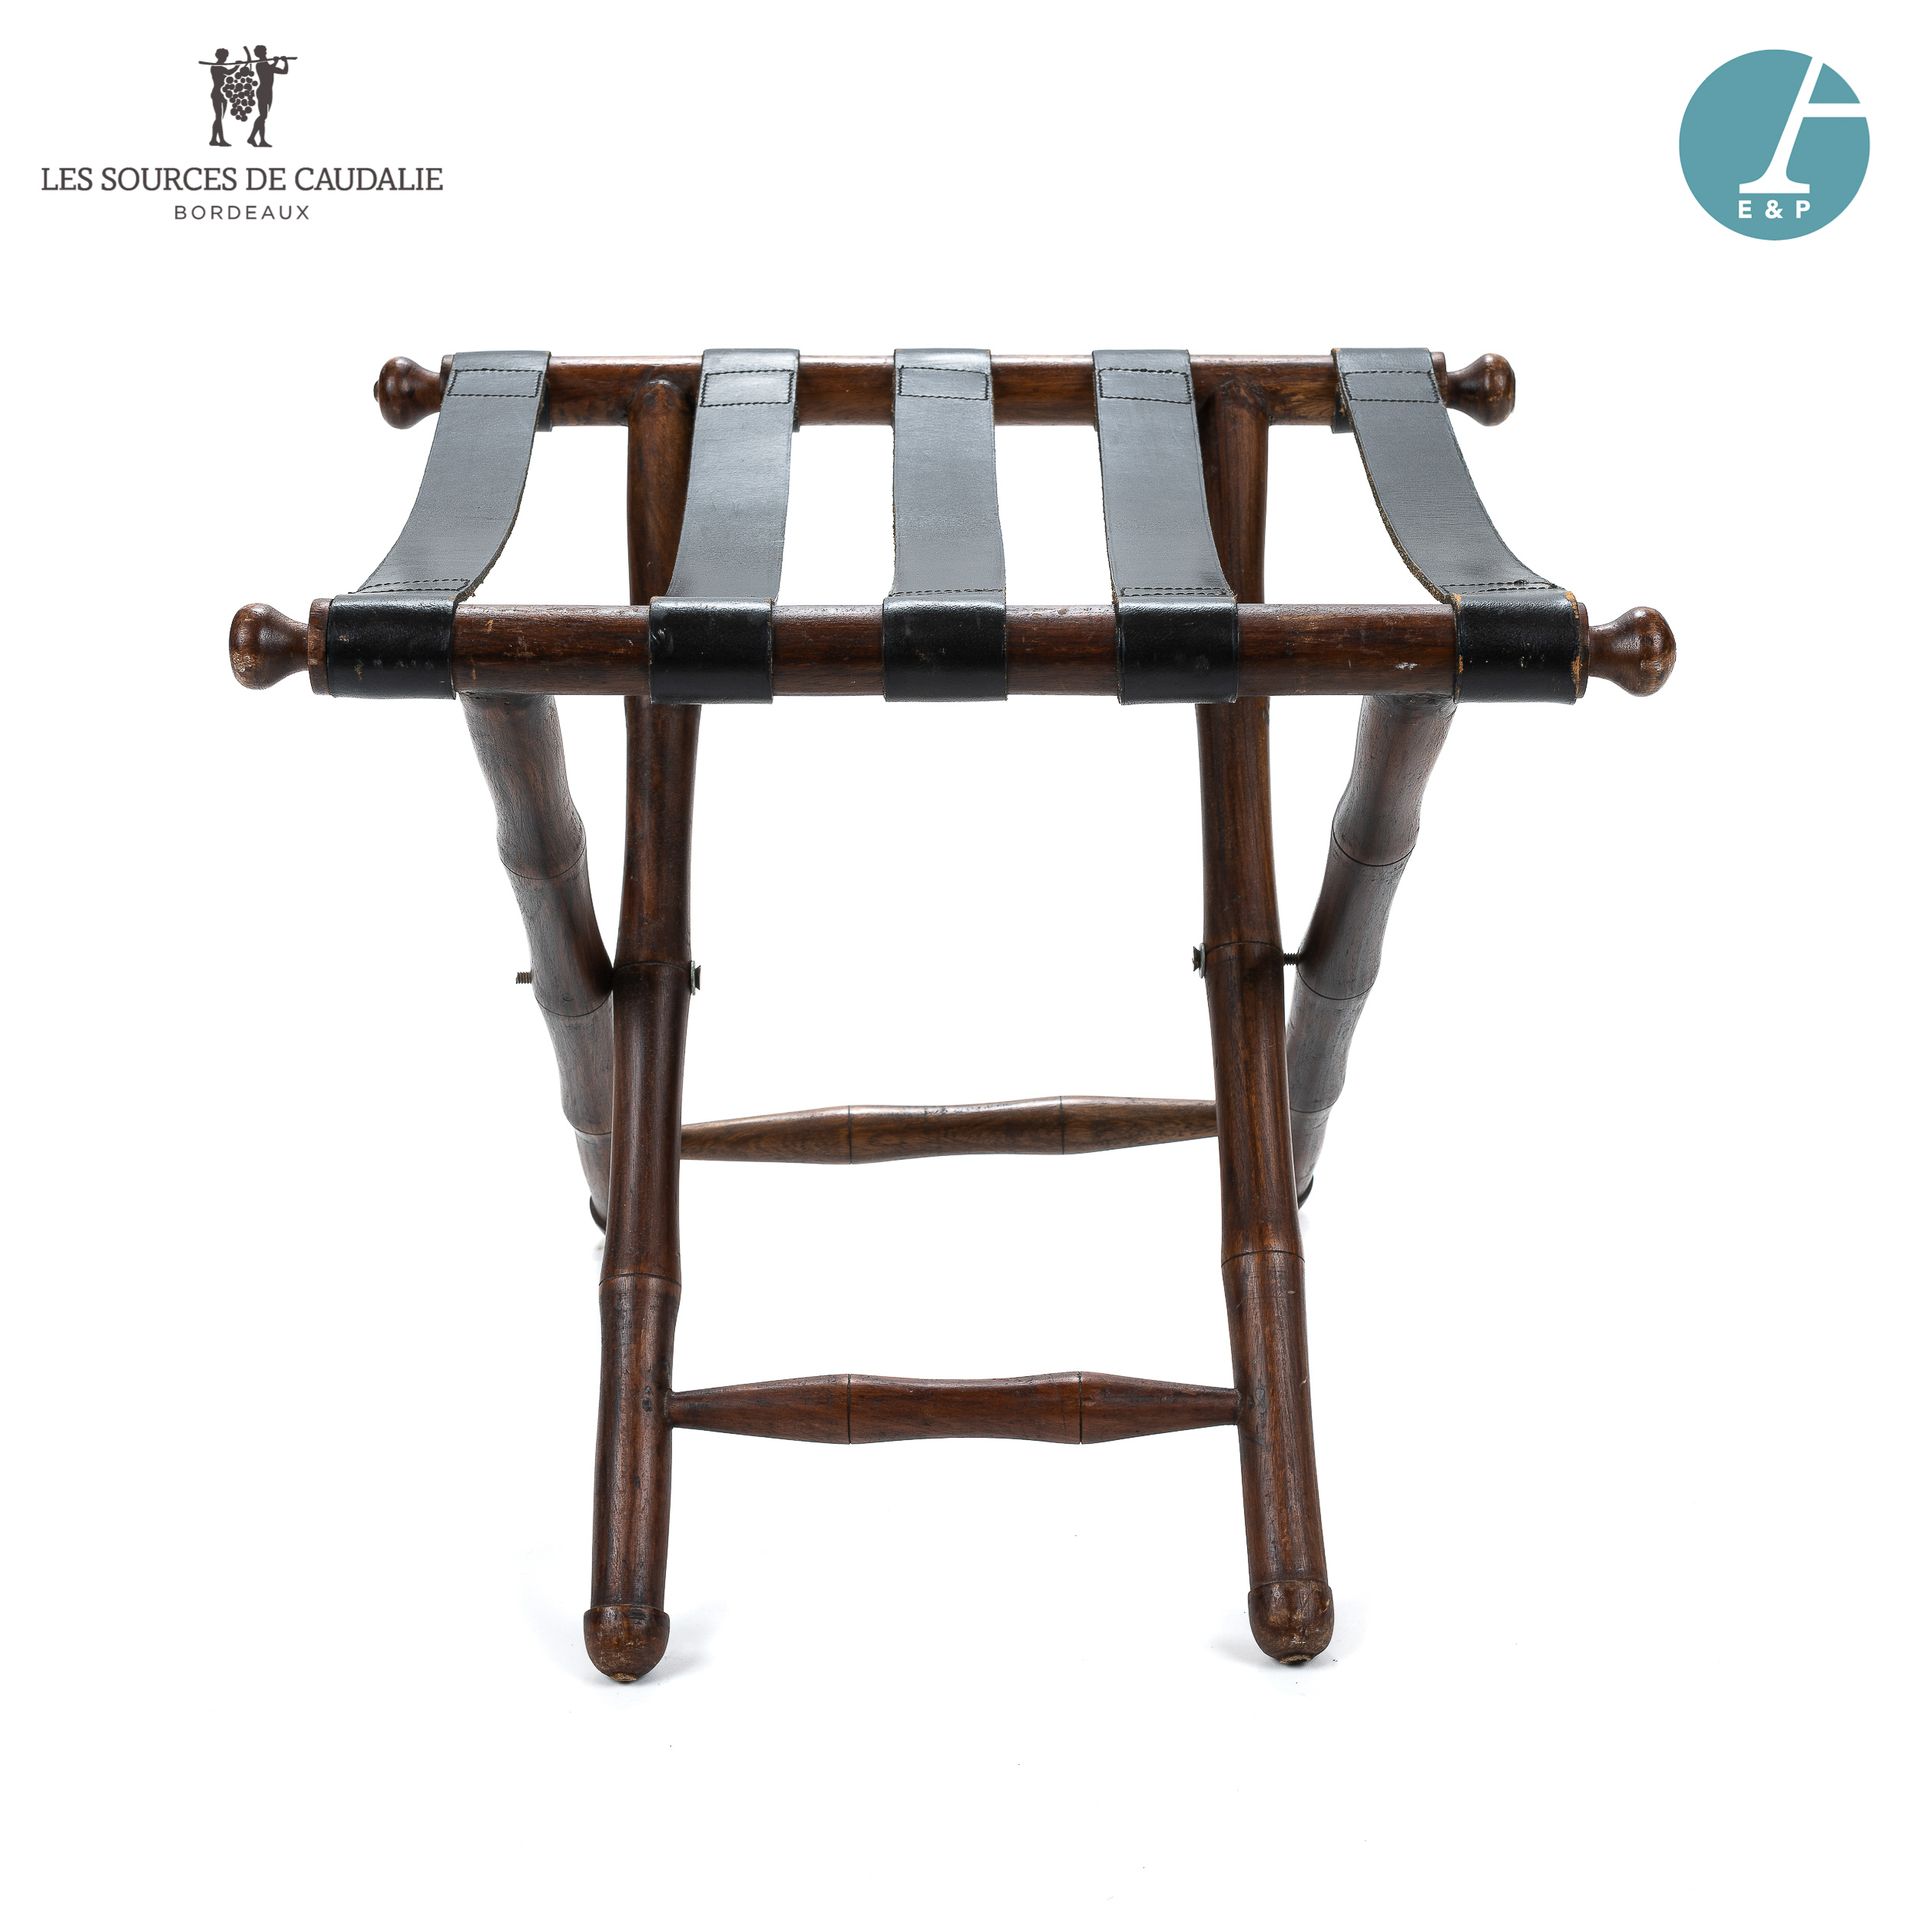 Null From Room n°4 "Les Douelles".

Folding luggage rack in stained wood in maho&hellip;